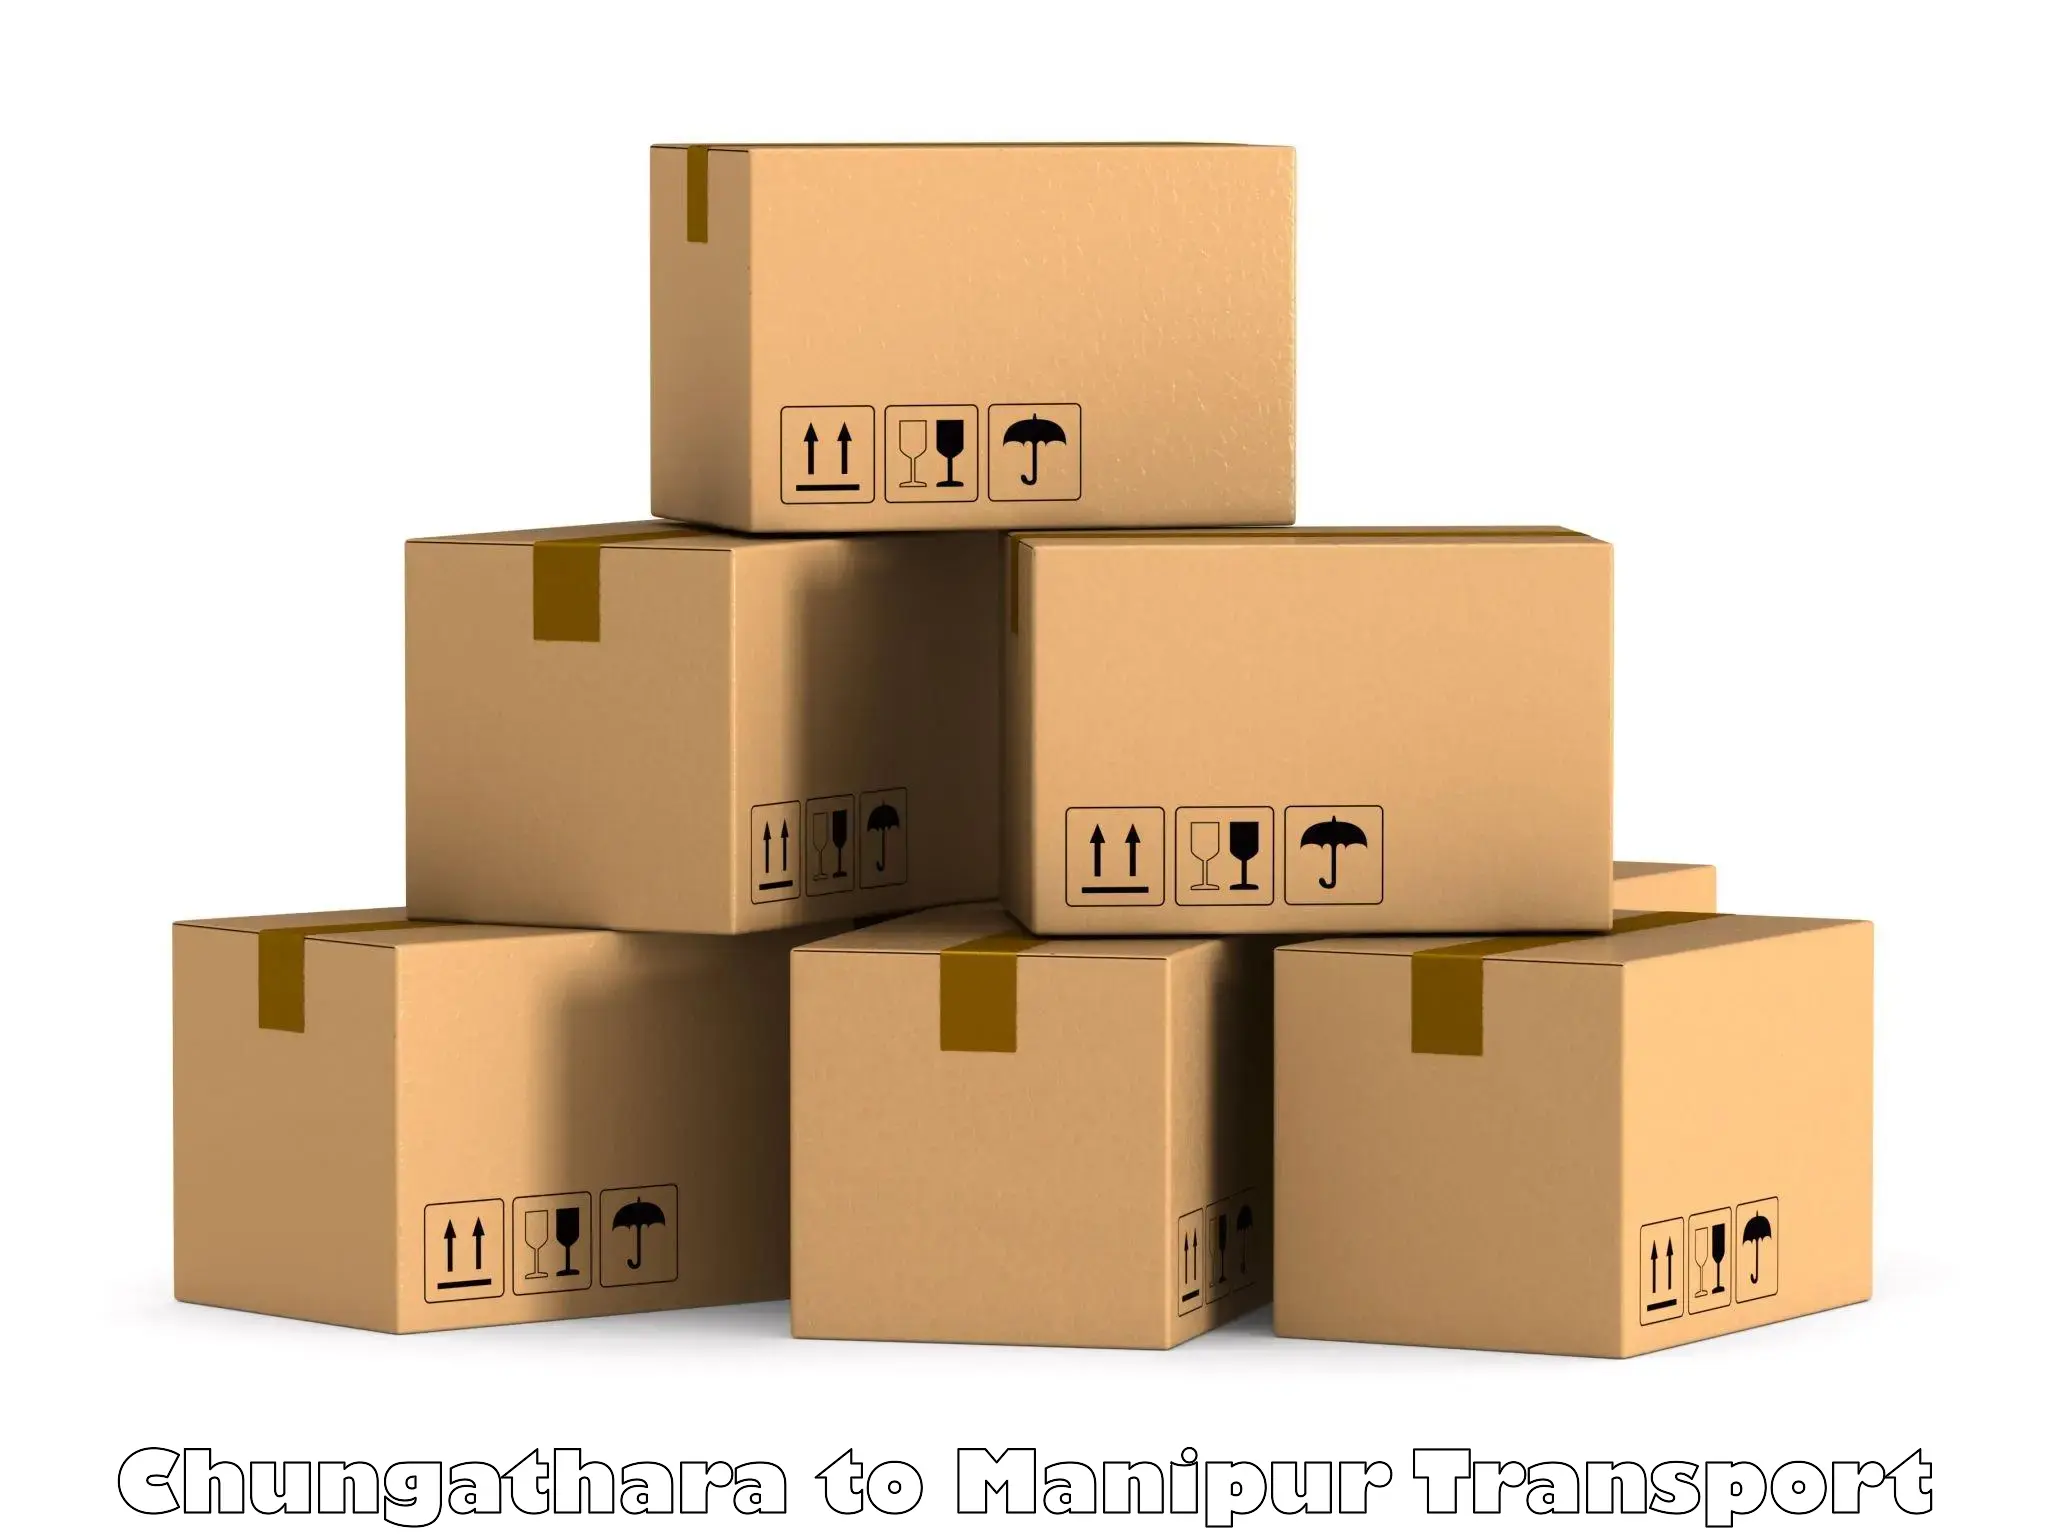 Goods delivery service Chungathara to Manipur